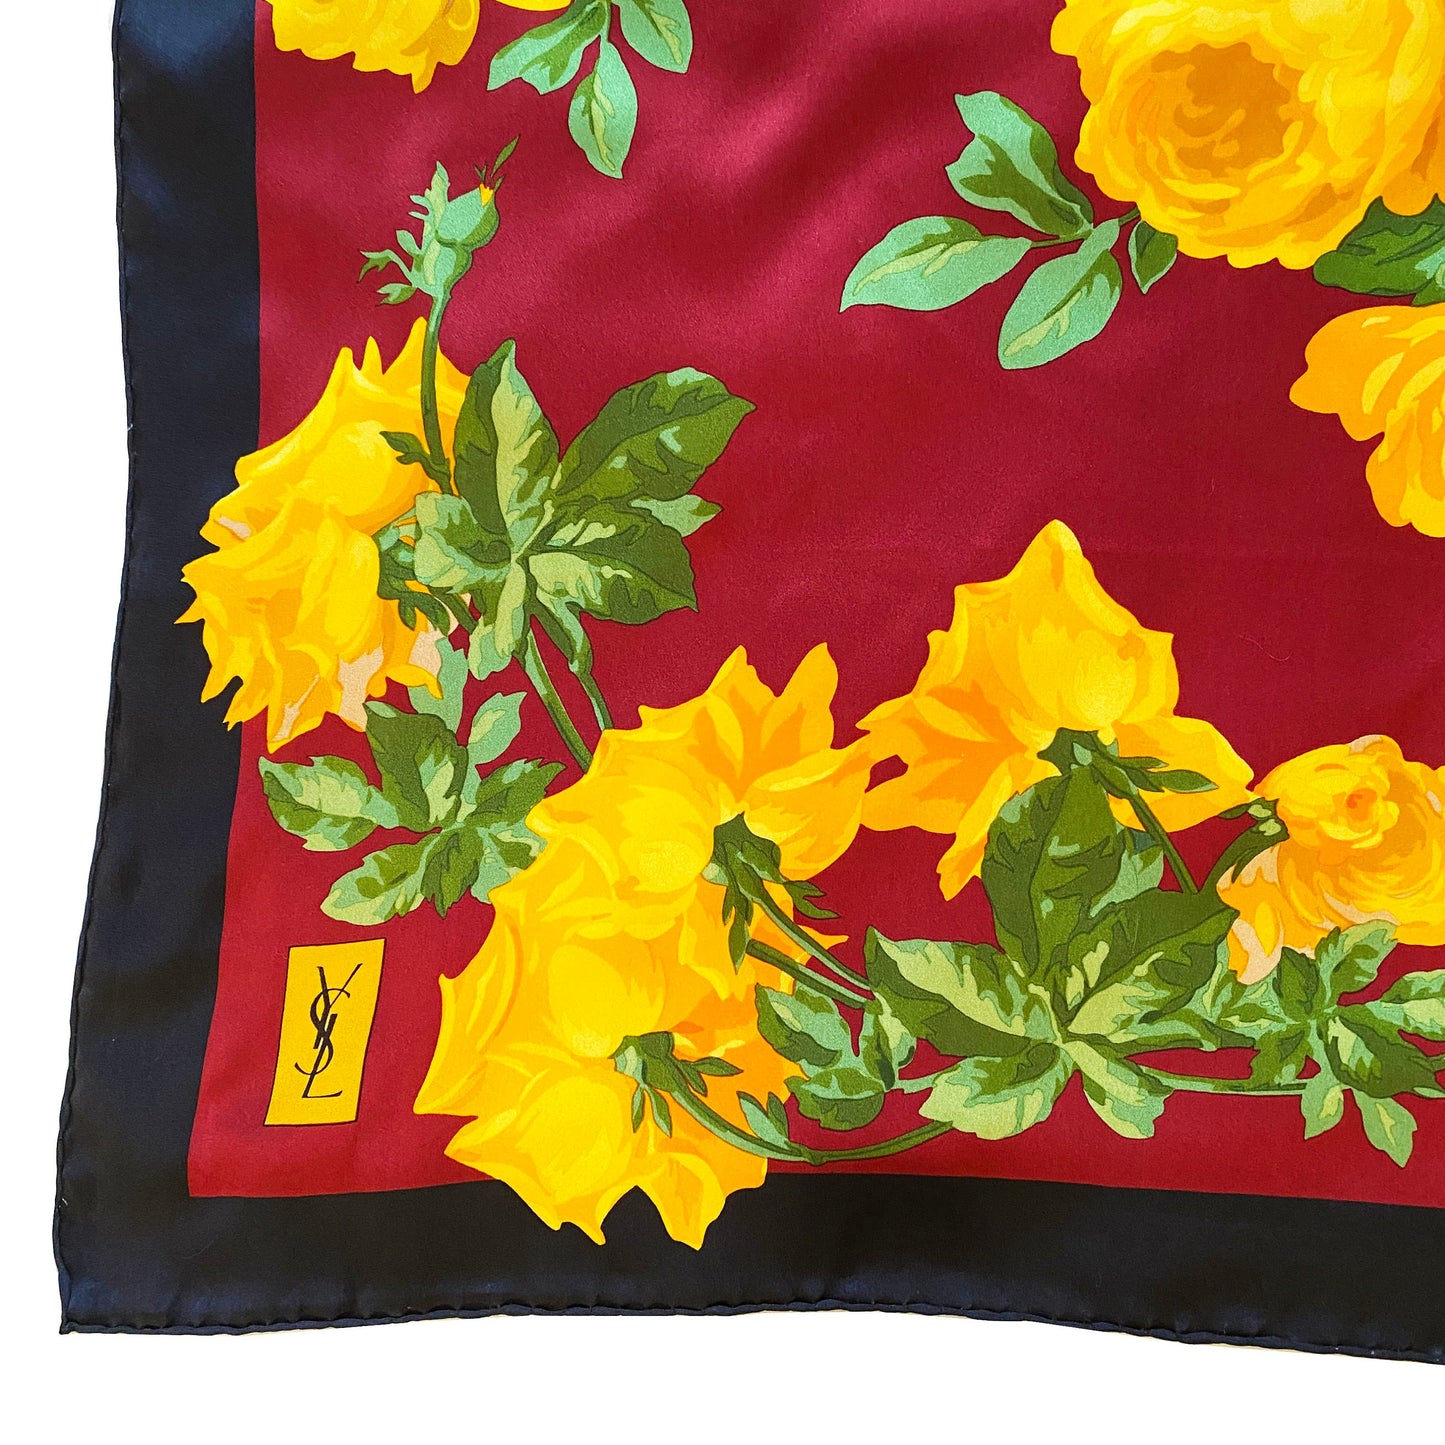 1990s Yves Saint Laurent Silk Twill Yellow Rose Scarf Large Square Made in Italy Floral Red Black Gold Romantic Gift YSL 90s Y2K